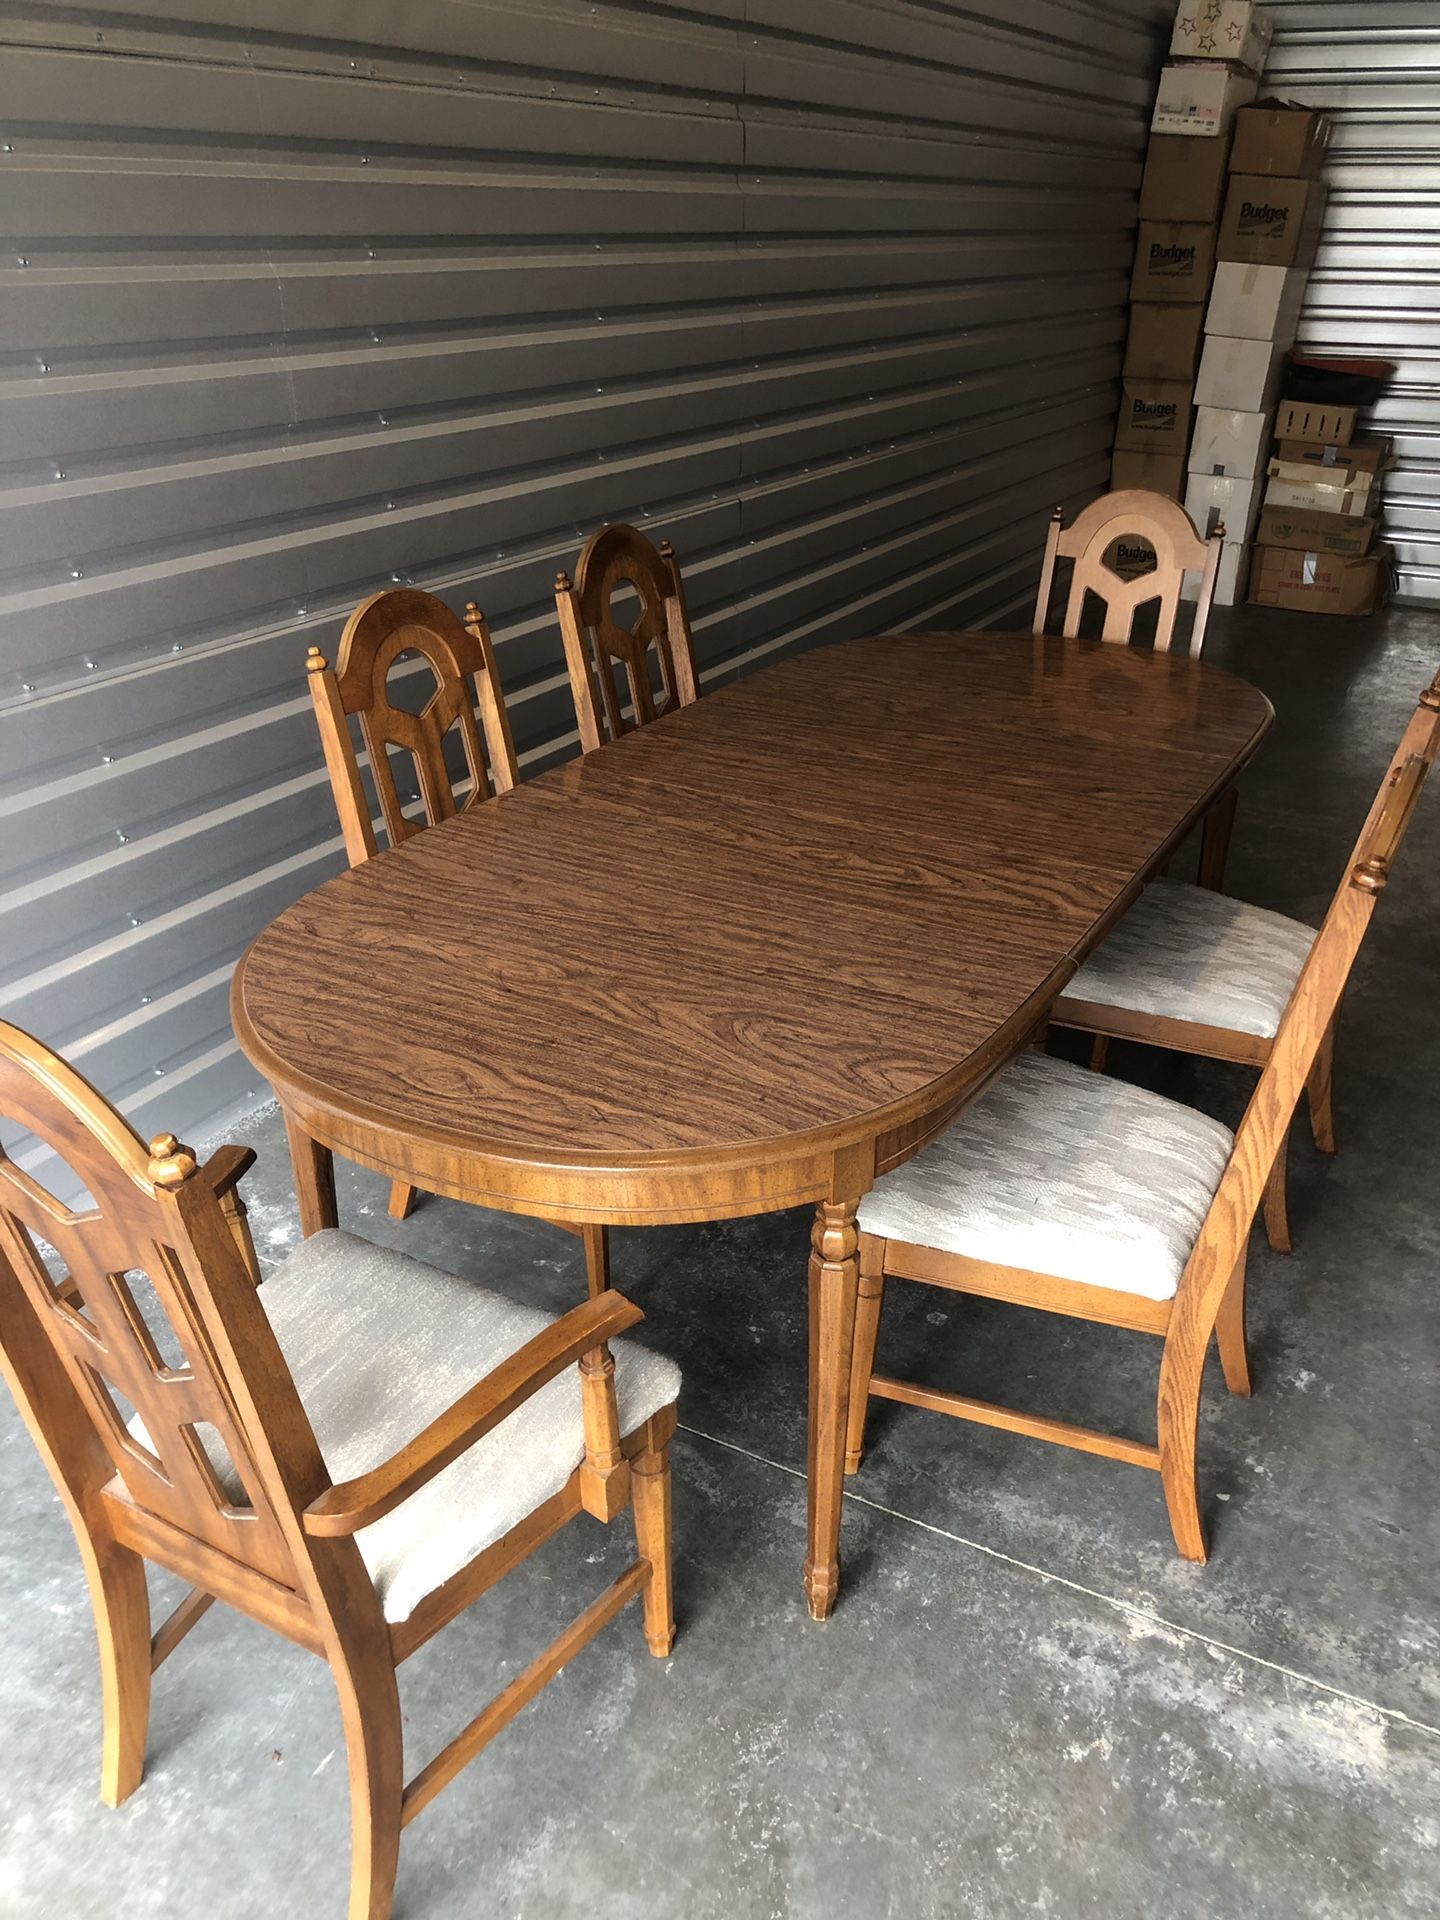 Table w/ 3 leaves and 6 chairs $150or OBO